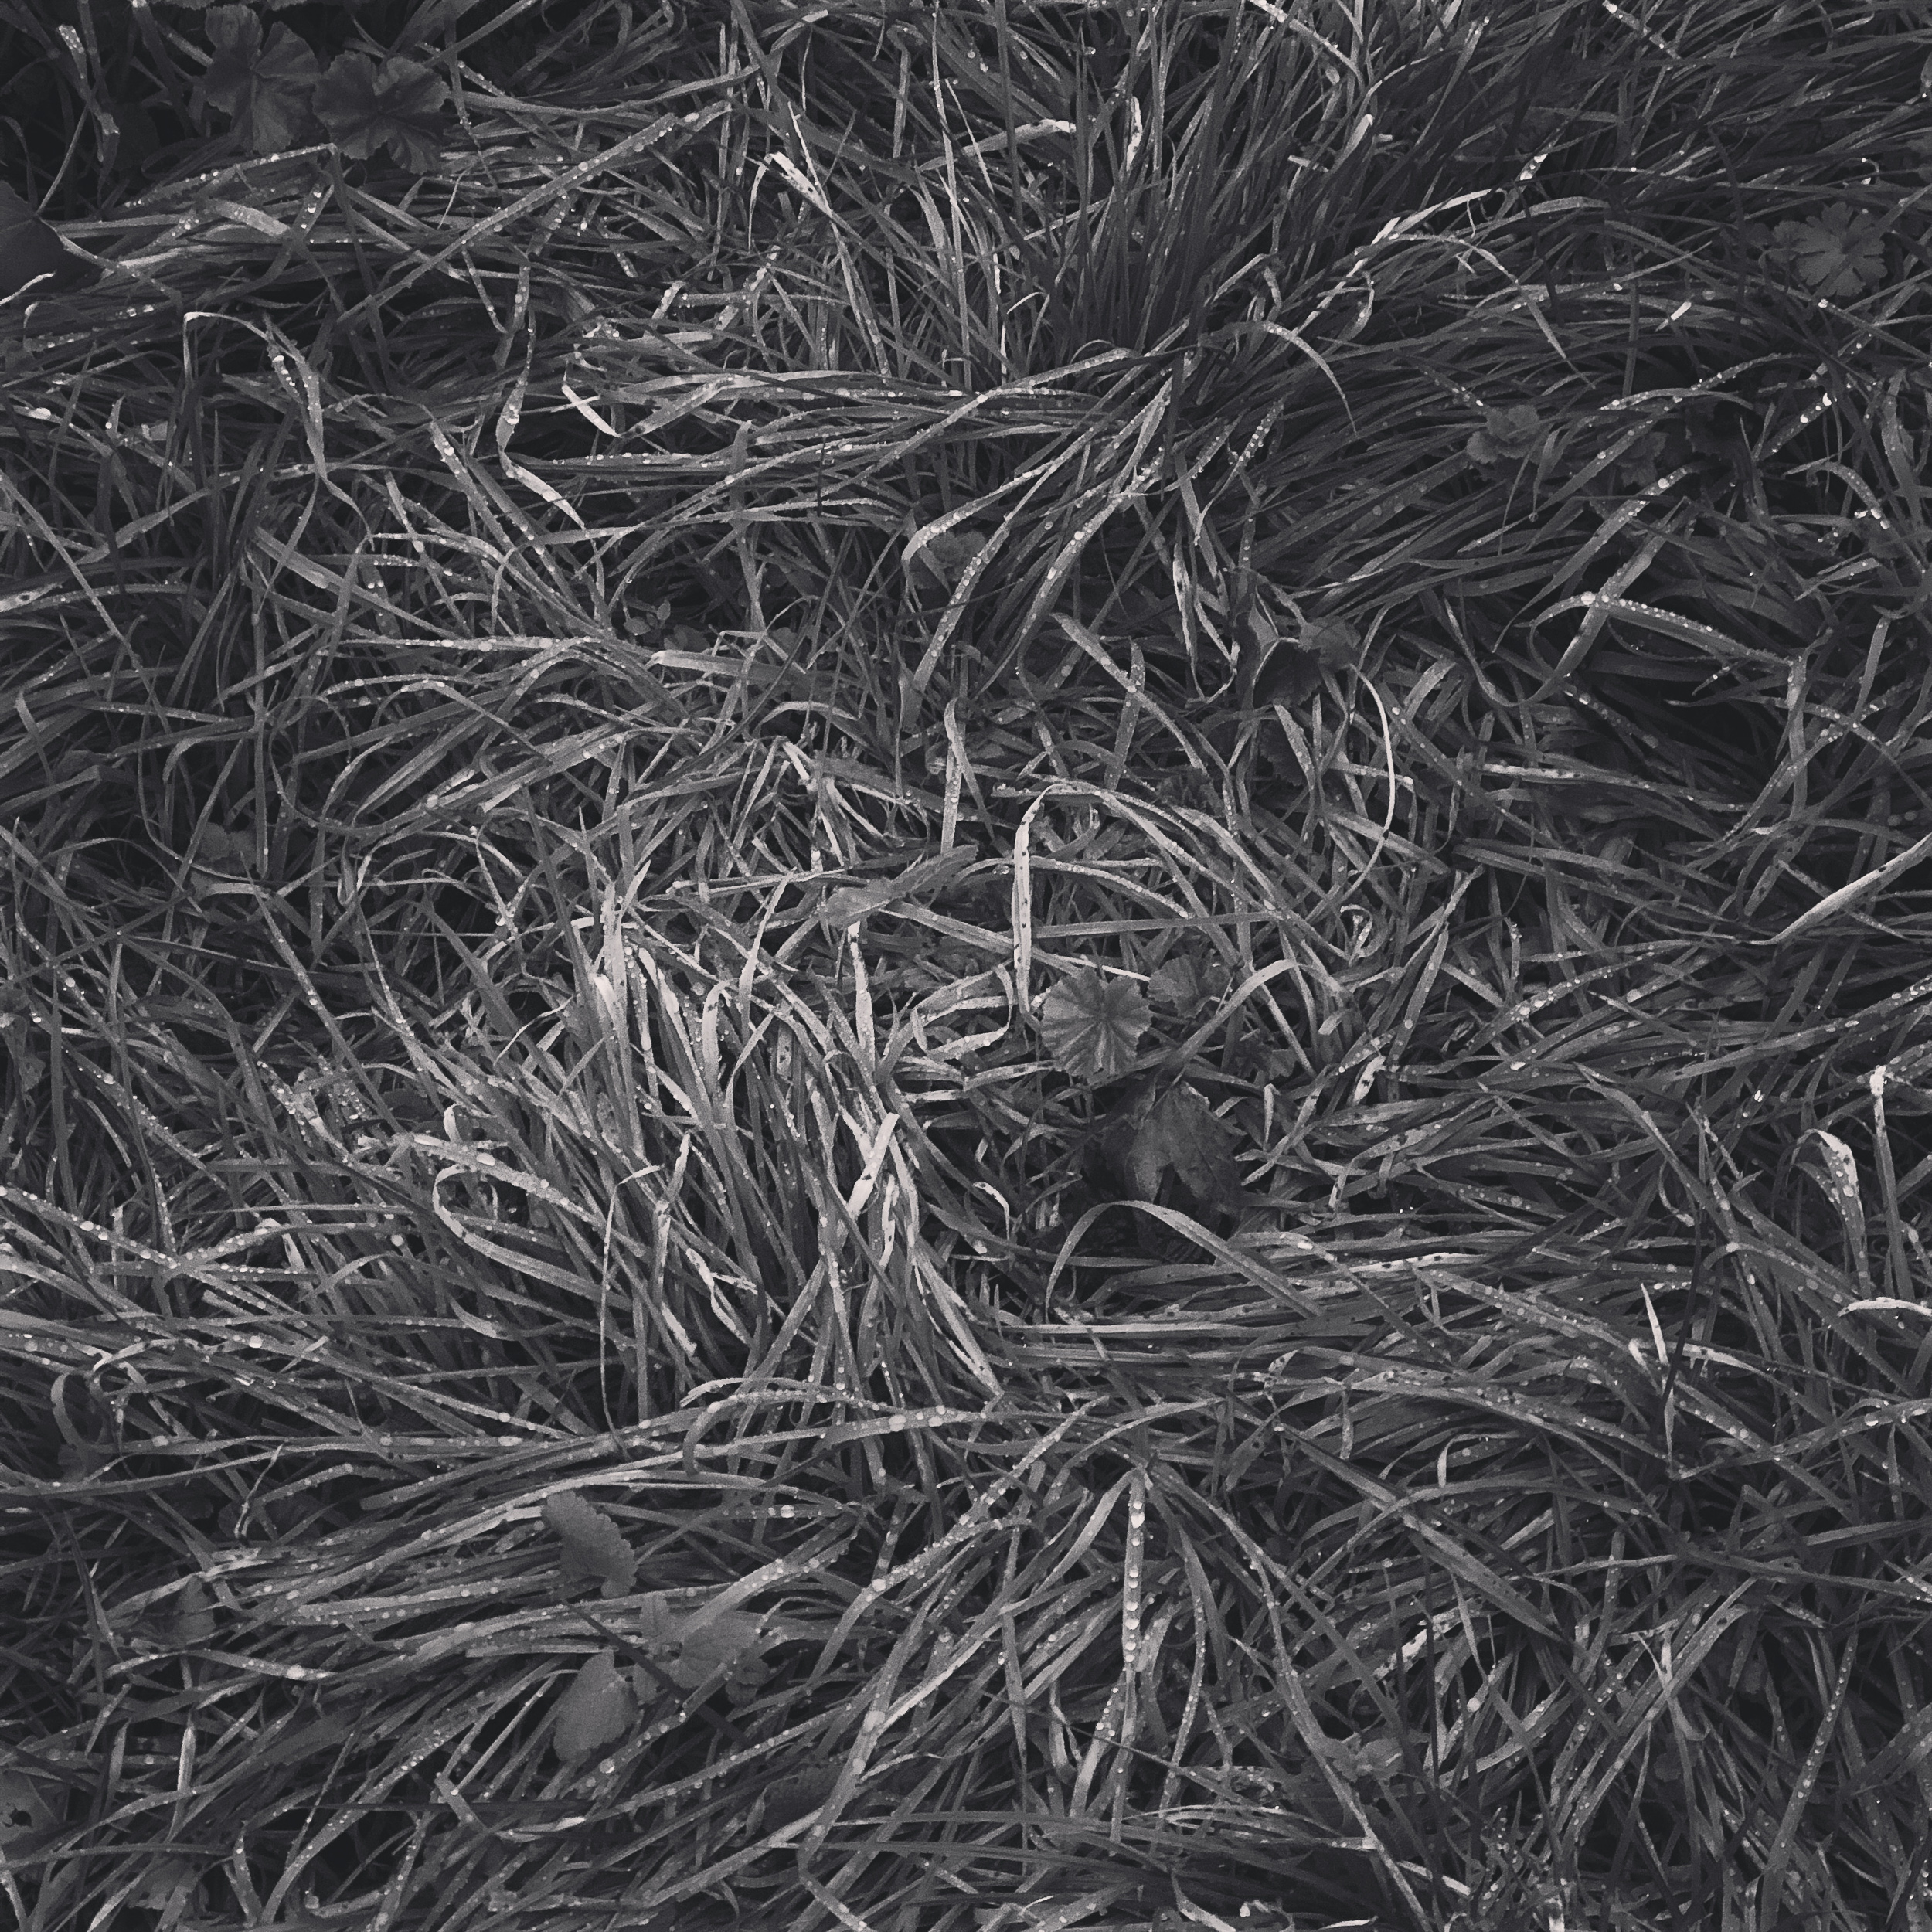 The structure of grass